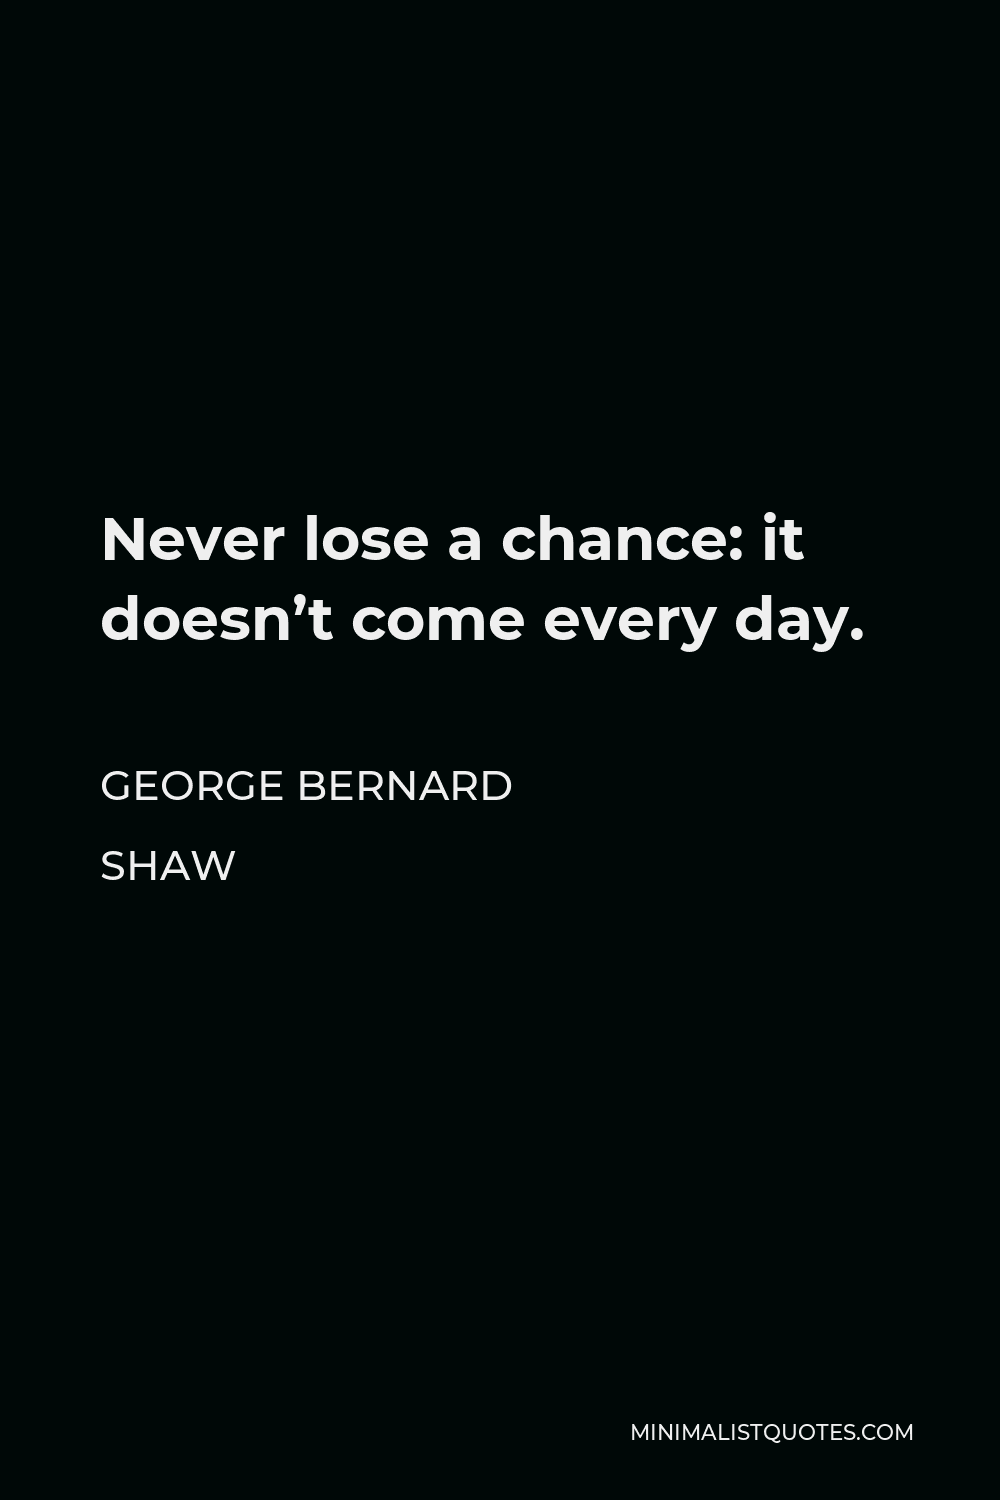 George Bernard Shaw Quote - Never lose a chance: it doesn’t come every day.